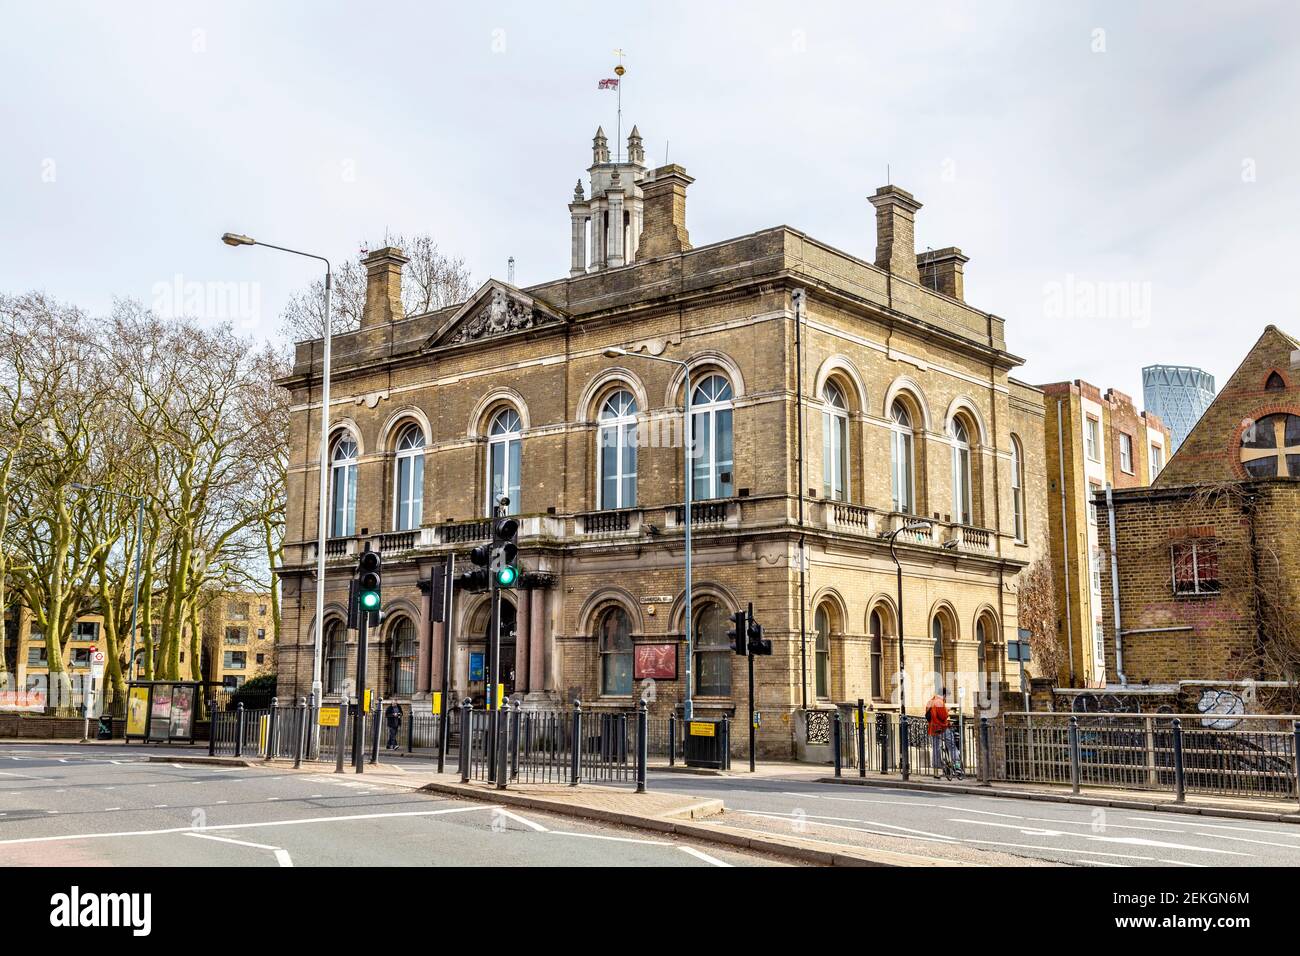 Former town hall building - the Limehouse Town Hall on Commercial Road, Limehouse, Tower Hamlets, London, UK Stock Photo